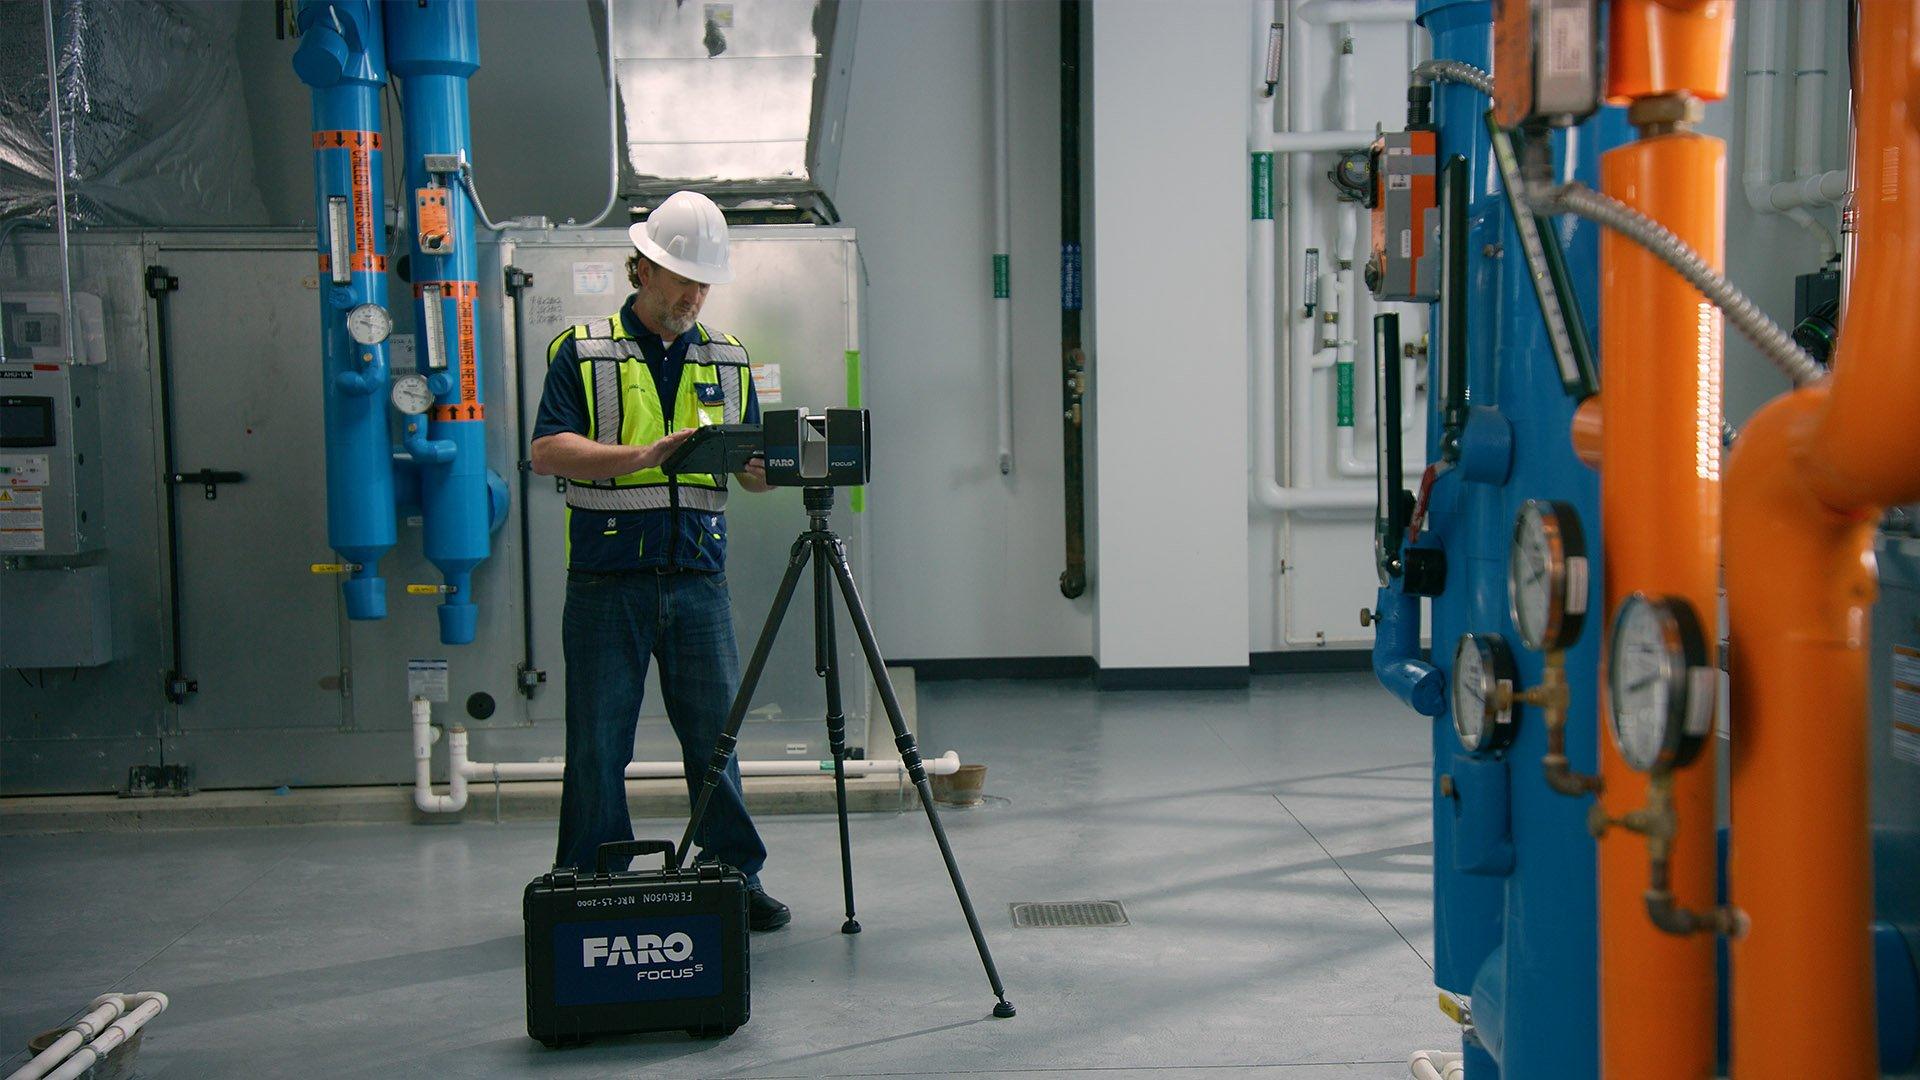 A Ferguson associate wearing a reflective vest and a hardhat uses a Faro 3D scanner in a mechanical room.